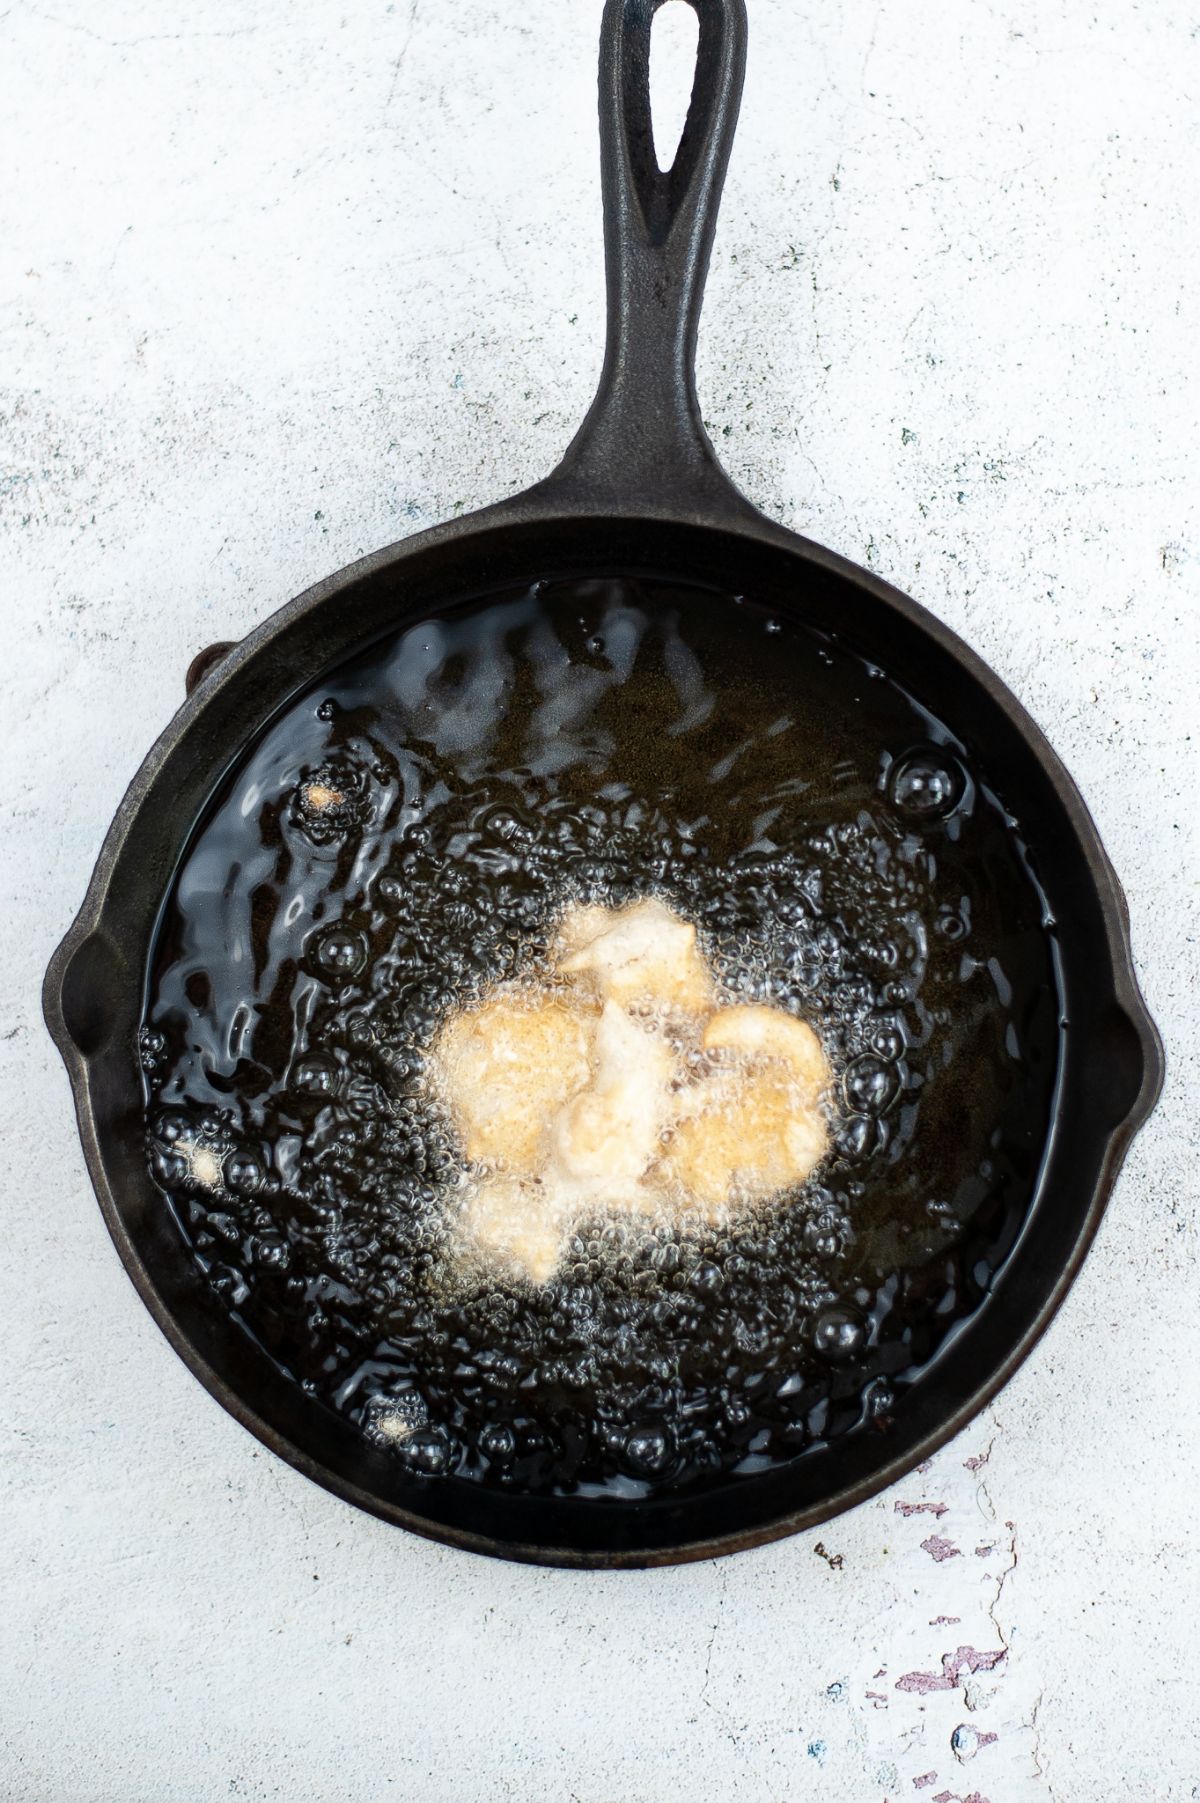 Fritters being fried in a skillet.